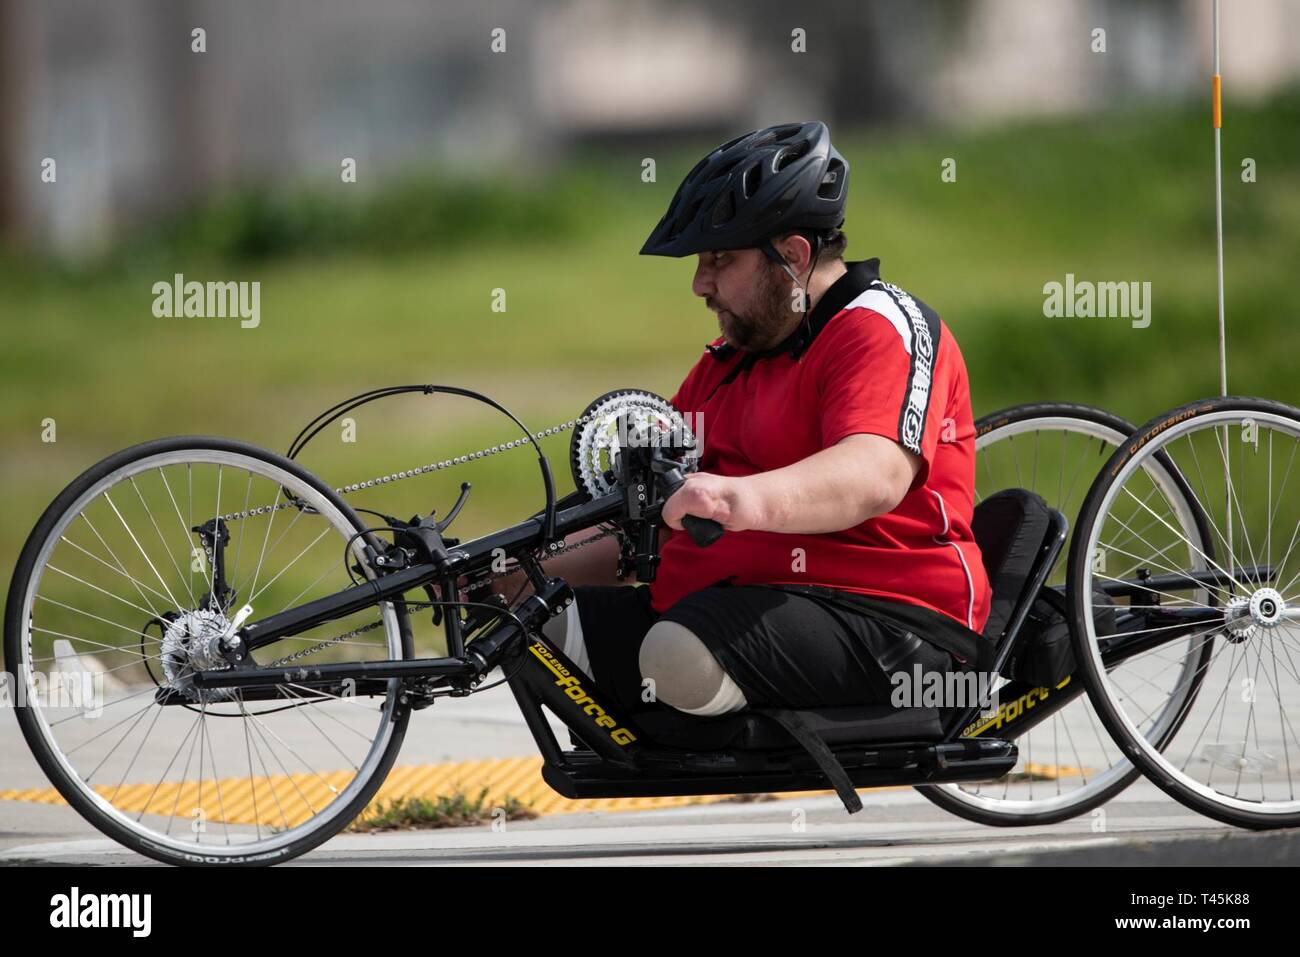 A Georgian athlete participates in hand cycling during the 2019 Marine Corps Trials at Marine Corps Base Camp Pendleton, California, March 1. The Marine Corps Trials promotes recovery and rehabilitation through adaptive sports participation and develops camaraderie among recovering service members and veterans. Additionally, the competition is an opportunity for participants to demonstrate physical and mental achievements and serves as the primary venue to select Marine Corps participants for the DoD Warrior Games. (Official U.S. Marine Corps Stock Photo